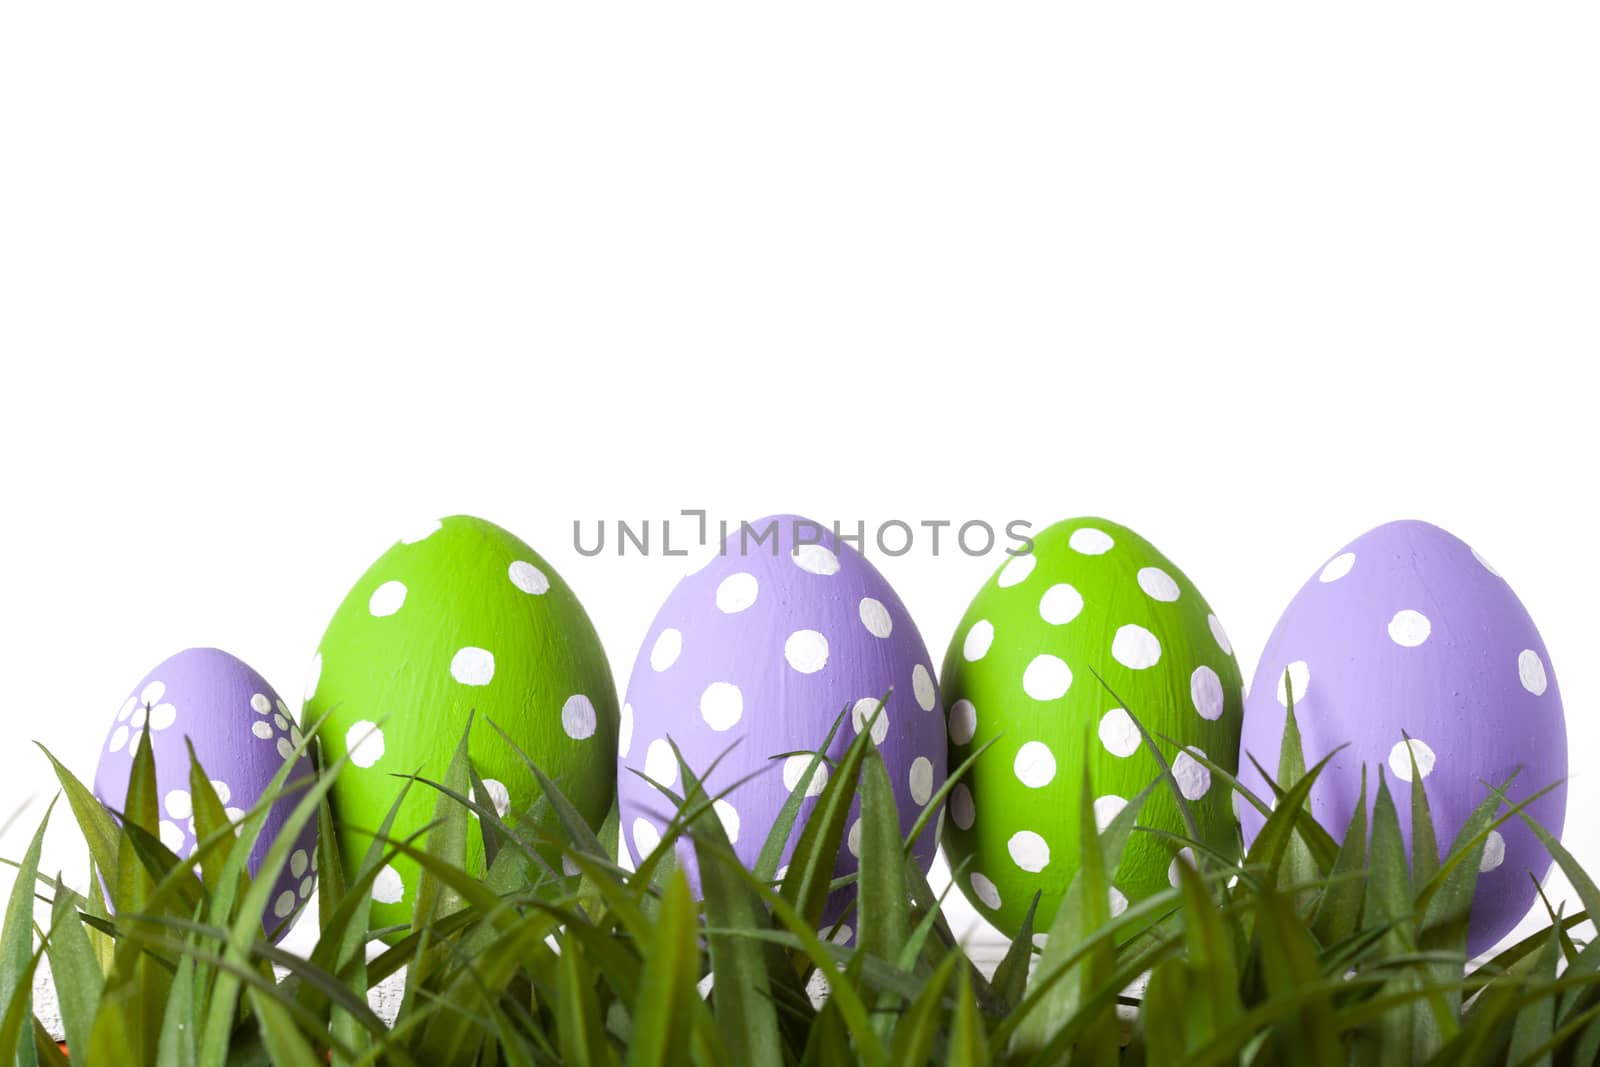 Row of Easter eggs in Fresh Green Grass by fotomaximum